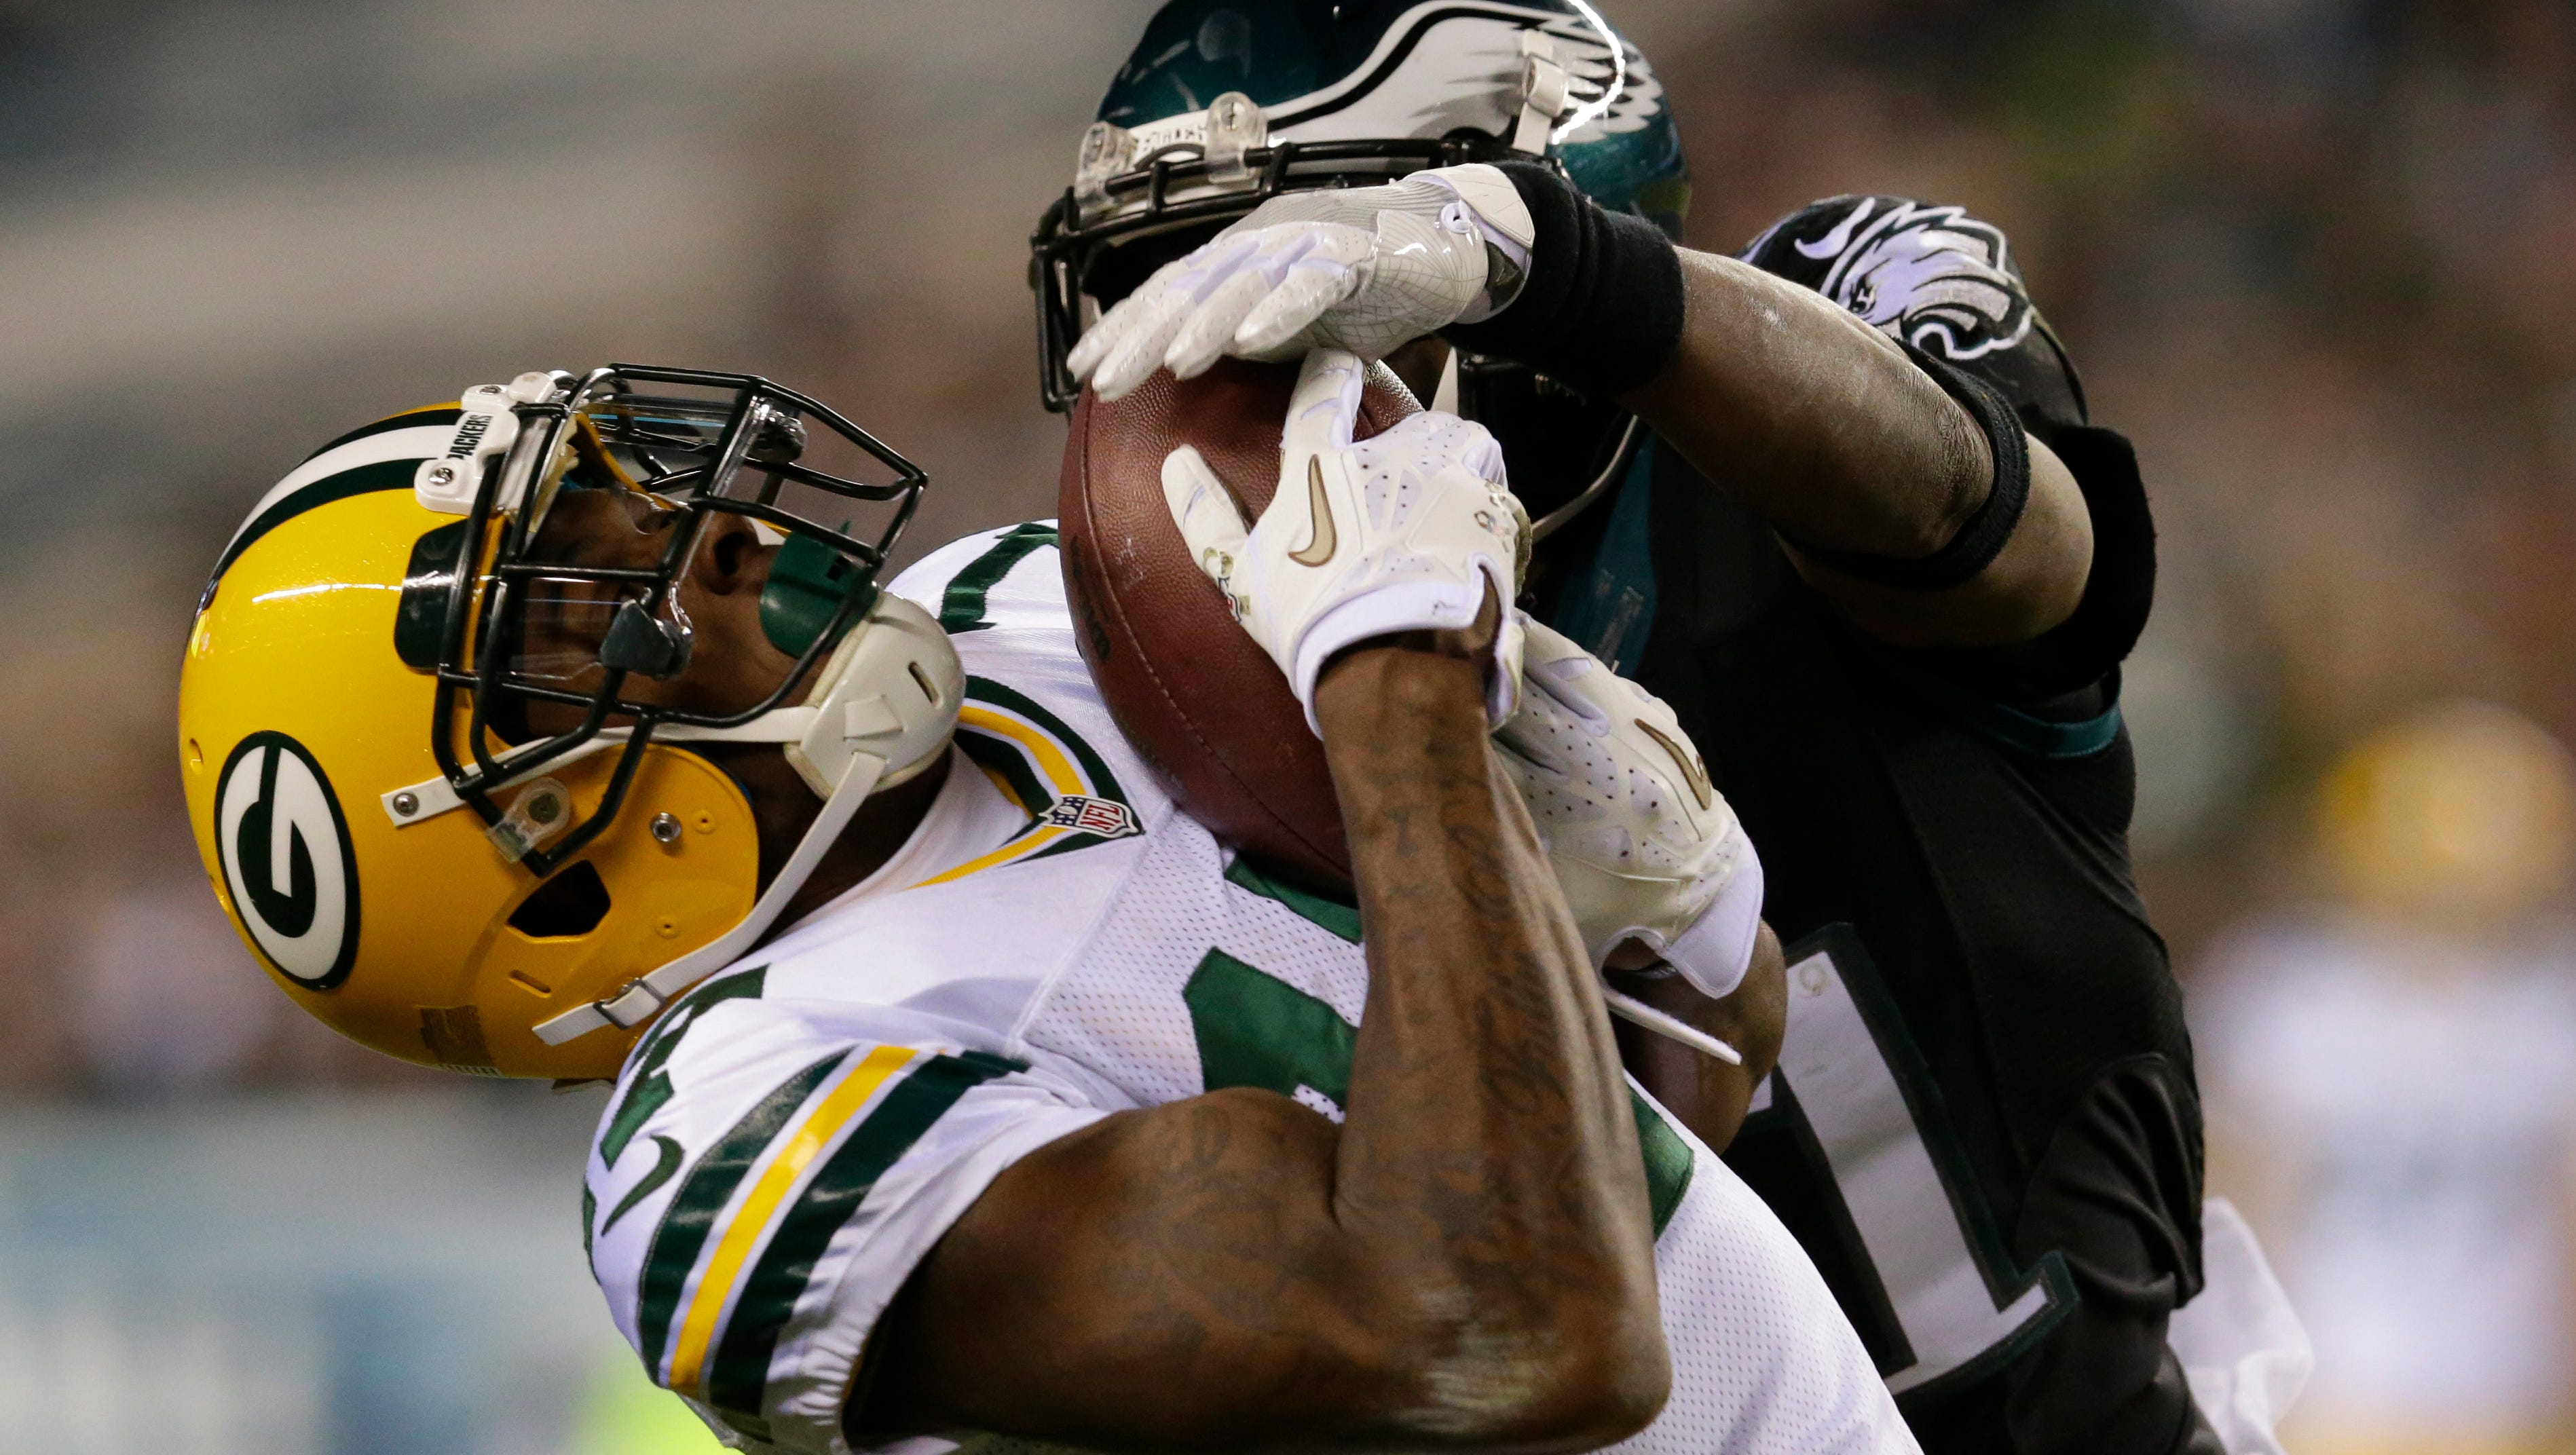 Green Bay Packers wide receiver Davante Adams (17) reels in a 50 yard reception w him being covered by Philadelphia Eagles cornerback Leodis McKelvin (21) during the third quarter of their game Monday, November 28, 2016 at Lincoln Financial Field in Philadelphia, Penn. The Green Bay Packers beat the Philadelphia Eagles 27-13.